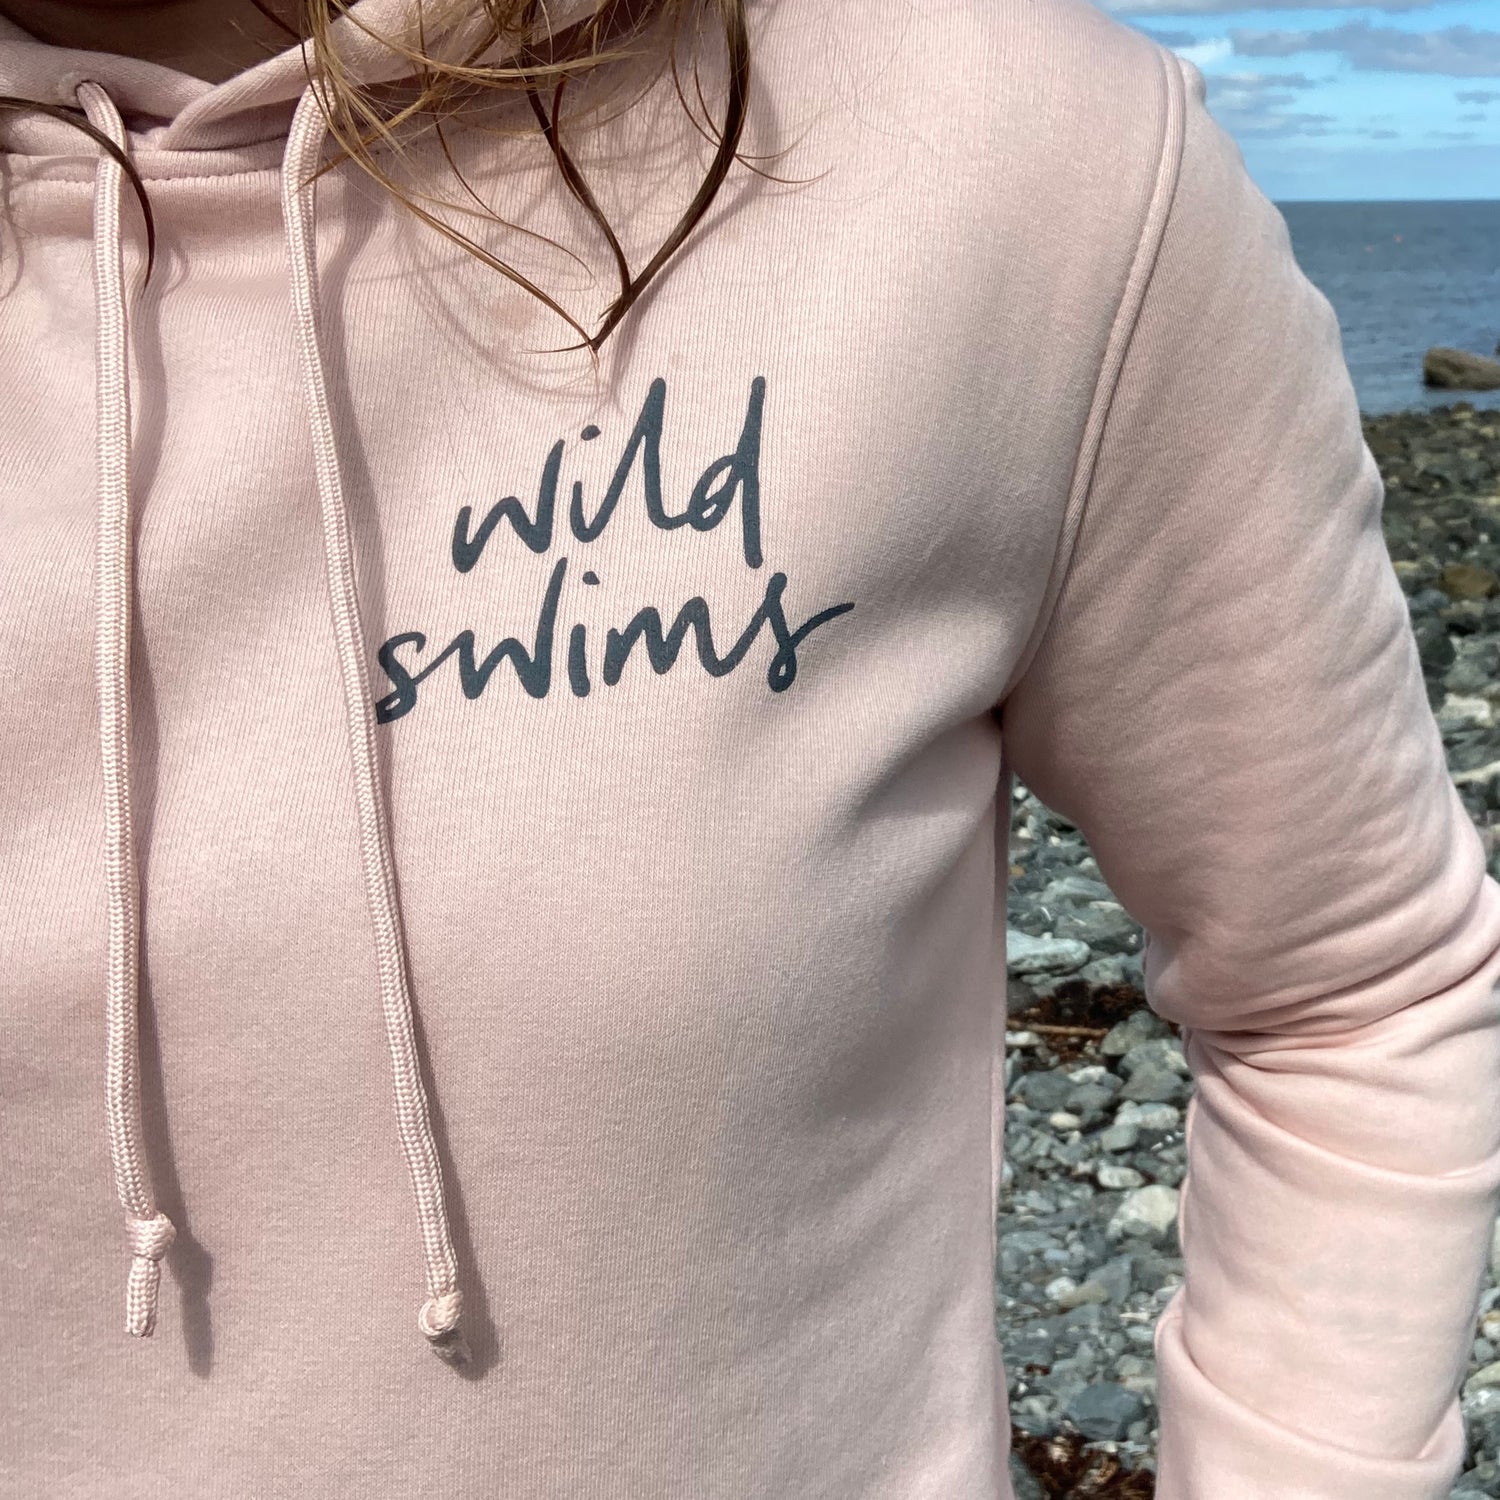 Cropped image of a women wearing a pink 'wild swims' hoodie. Her face is cropped out and the front print of the sweatshirt is visible. Behind her is a pebble beach and the sea.